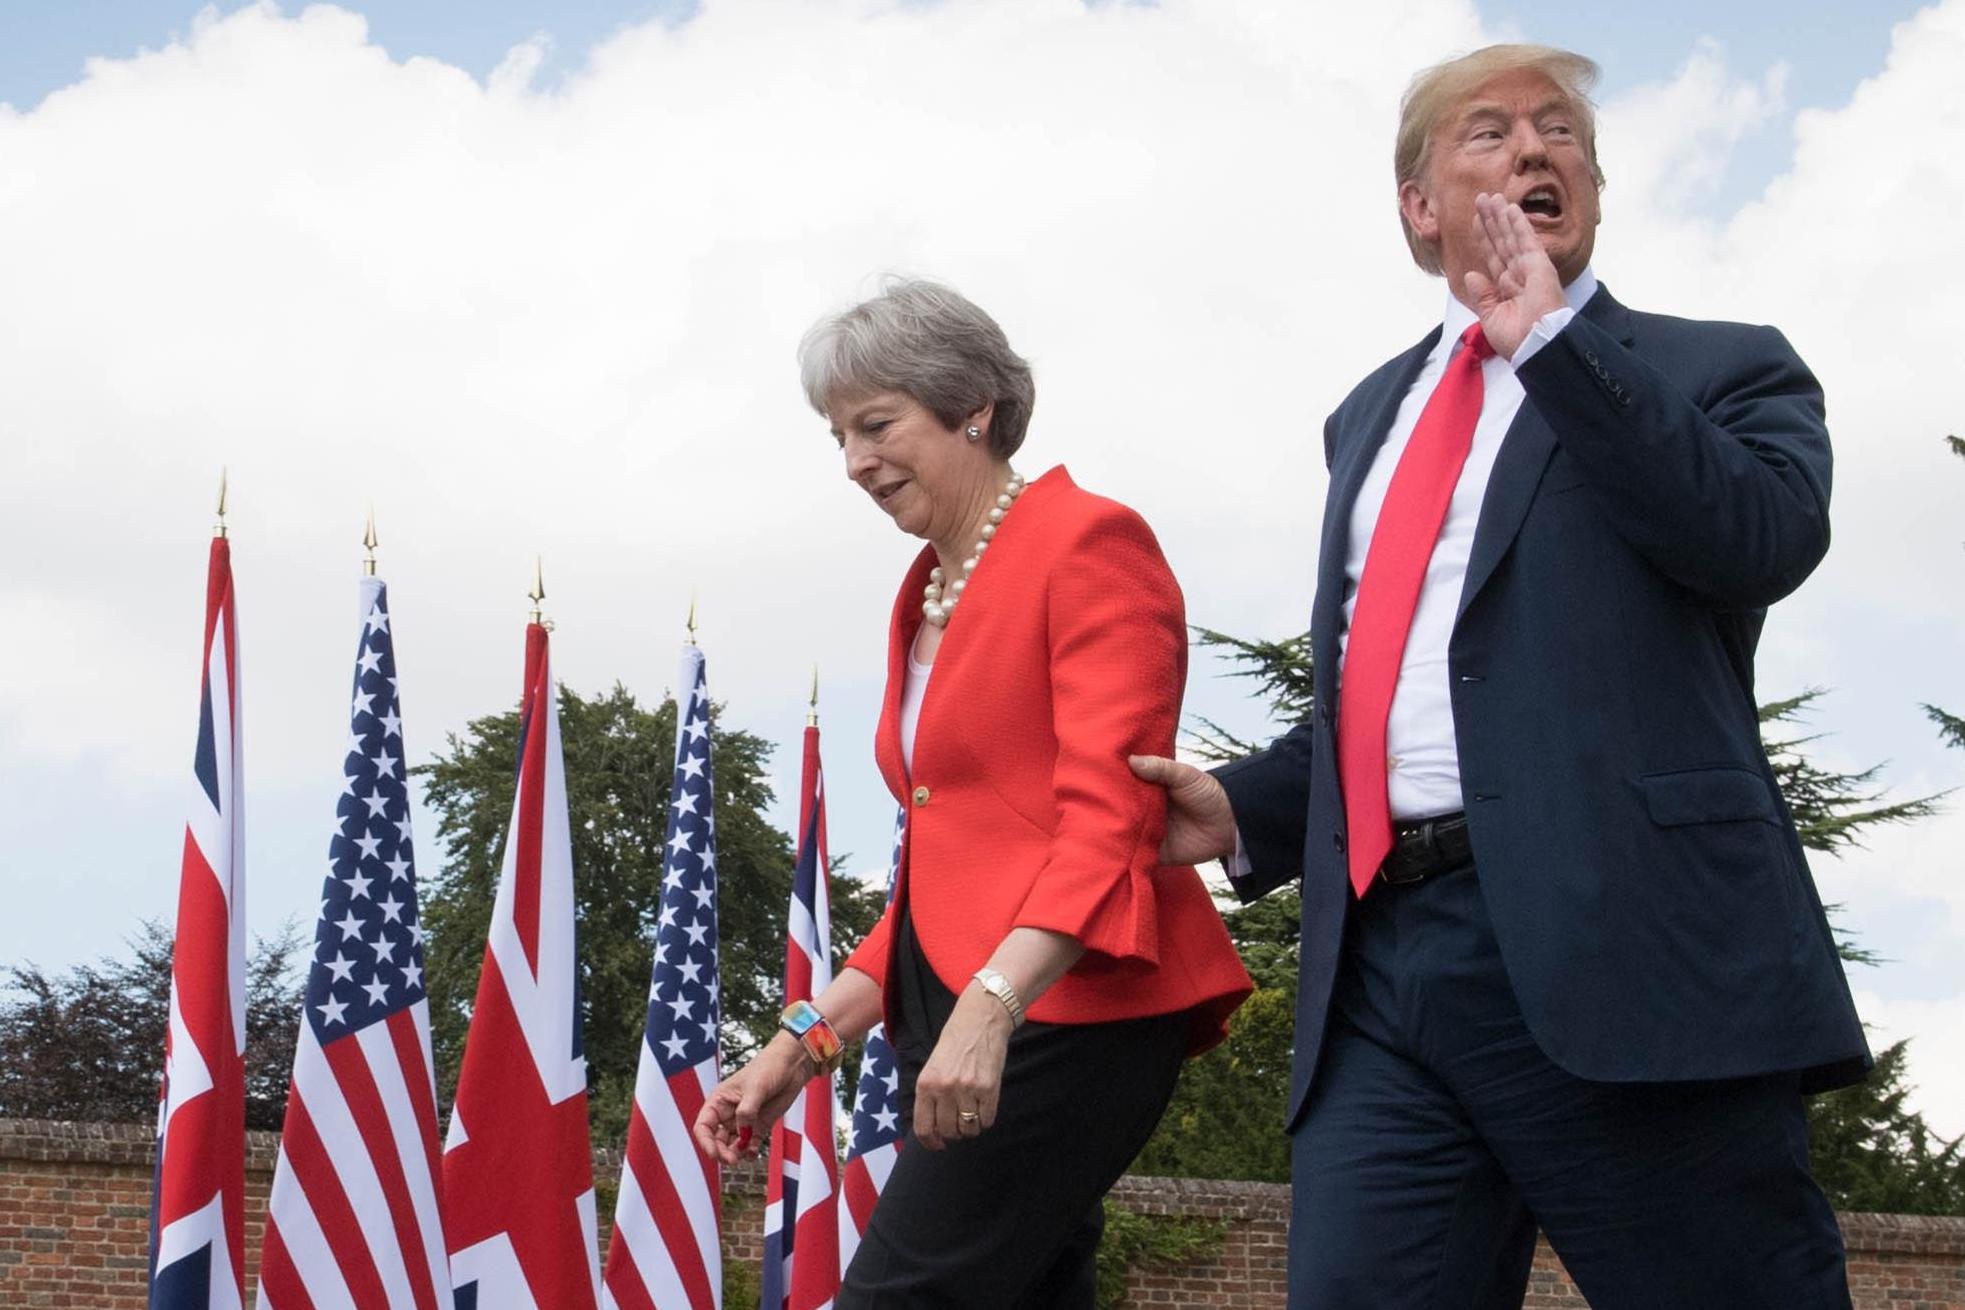 Trump says he feels sorry for Theresa May - but his friends are about to take over Britain